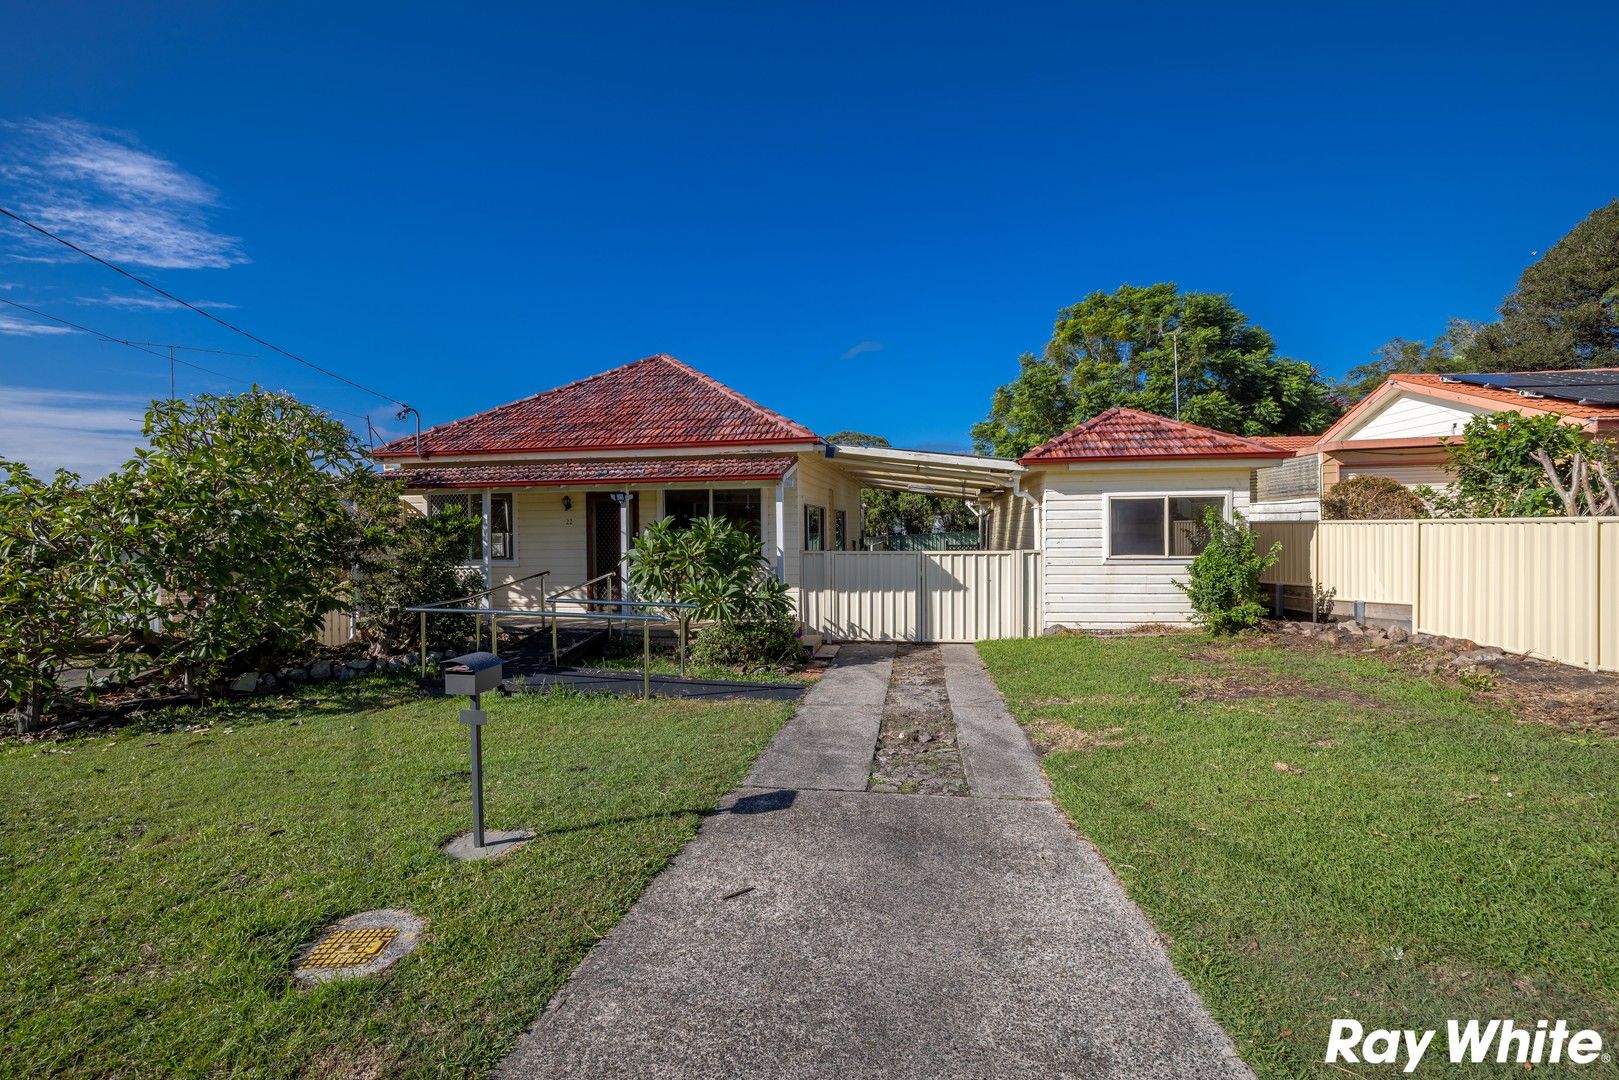 22 Carribean Avenue, Forster NSW 2428, Image 0